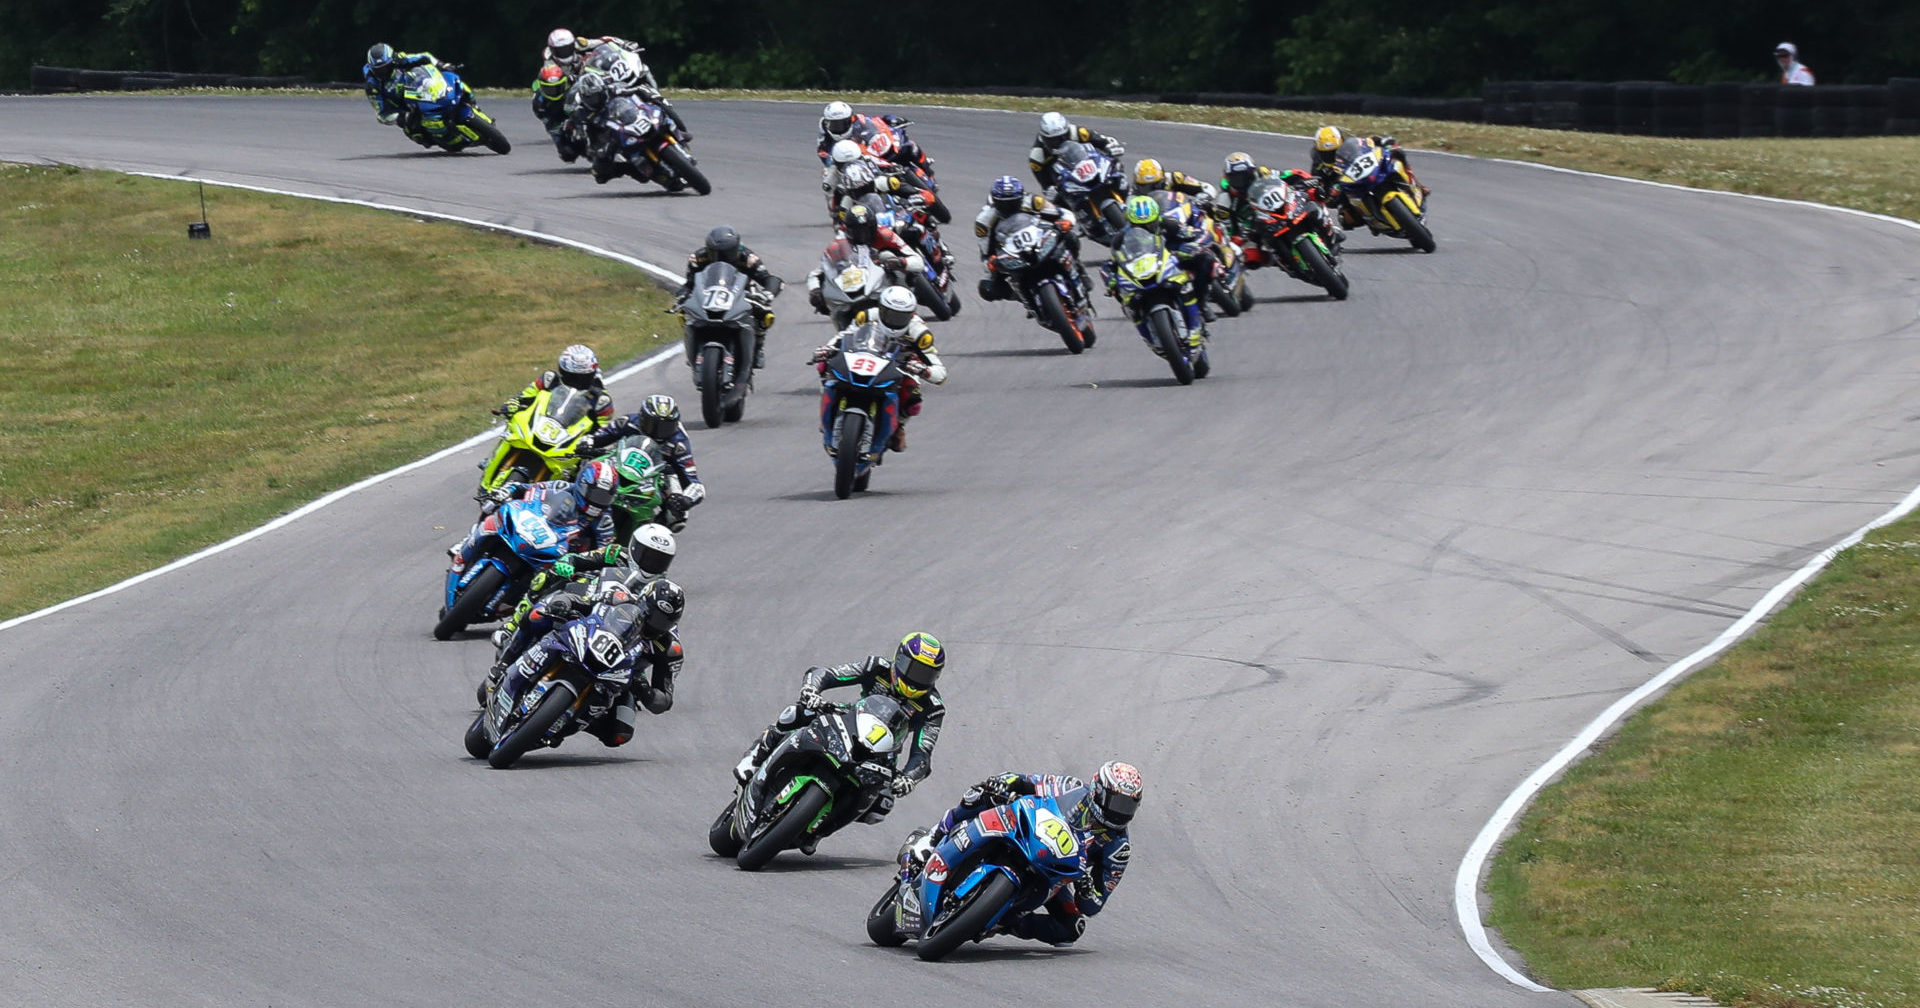 Sean Dylan Kelly (40) leading Richie Escalante (1), Benjamin Smith (88) and the rest of the MotoAmerica Supersport field at VIR. Photo by Brian J. Nelson.